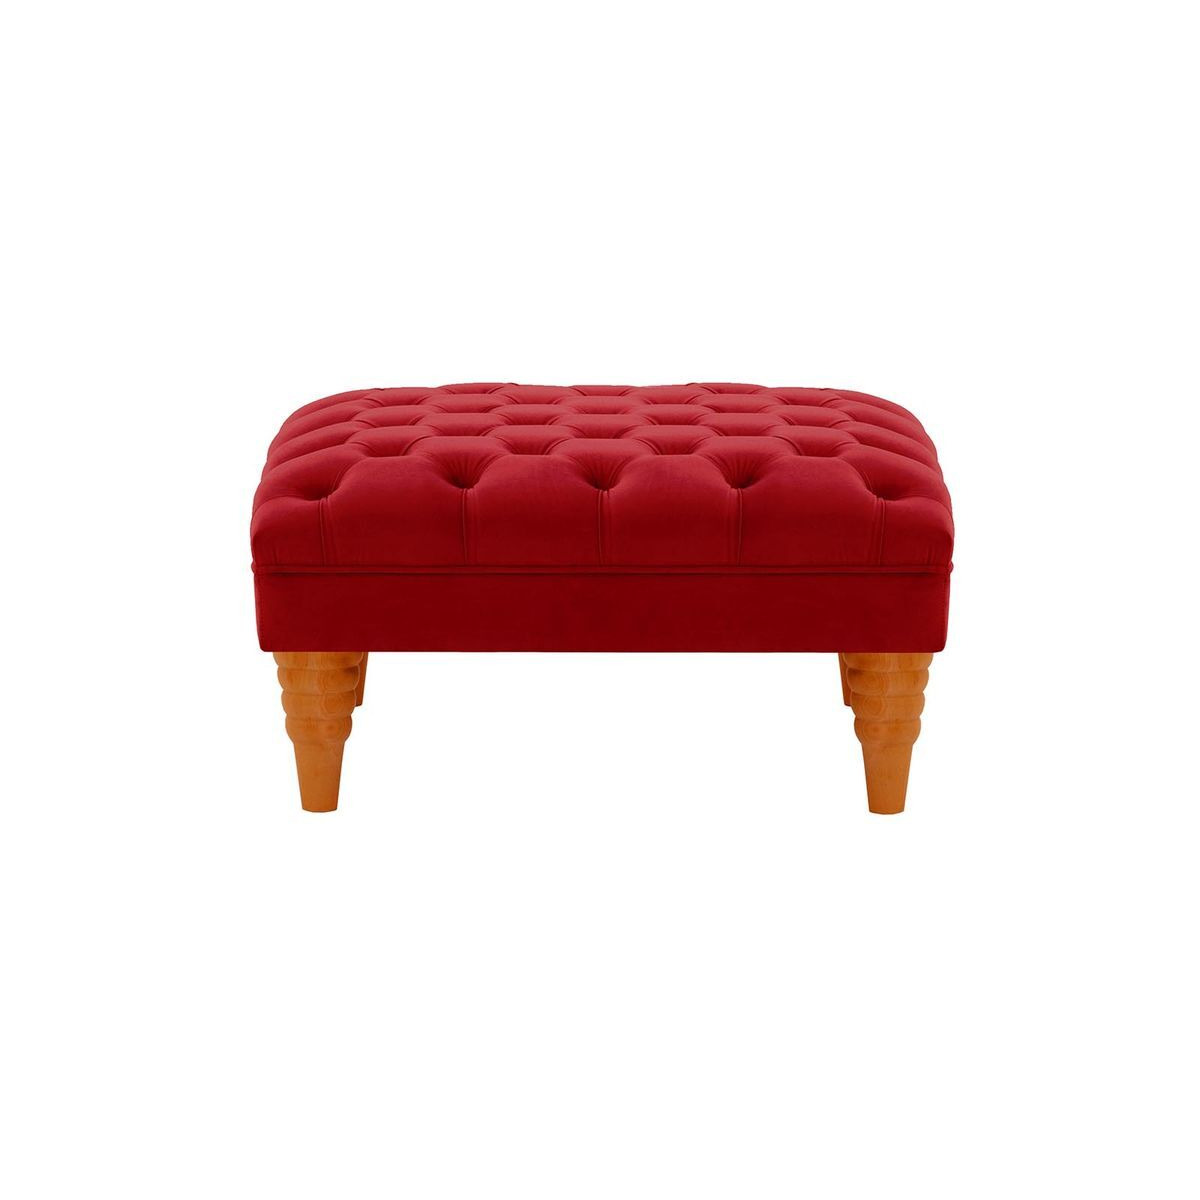 Chester Max Footstool, dark red, Leg colour: aveo - image 1